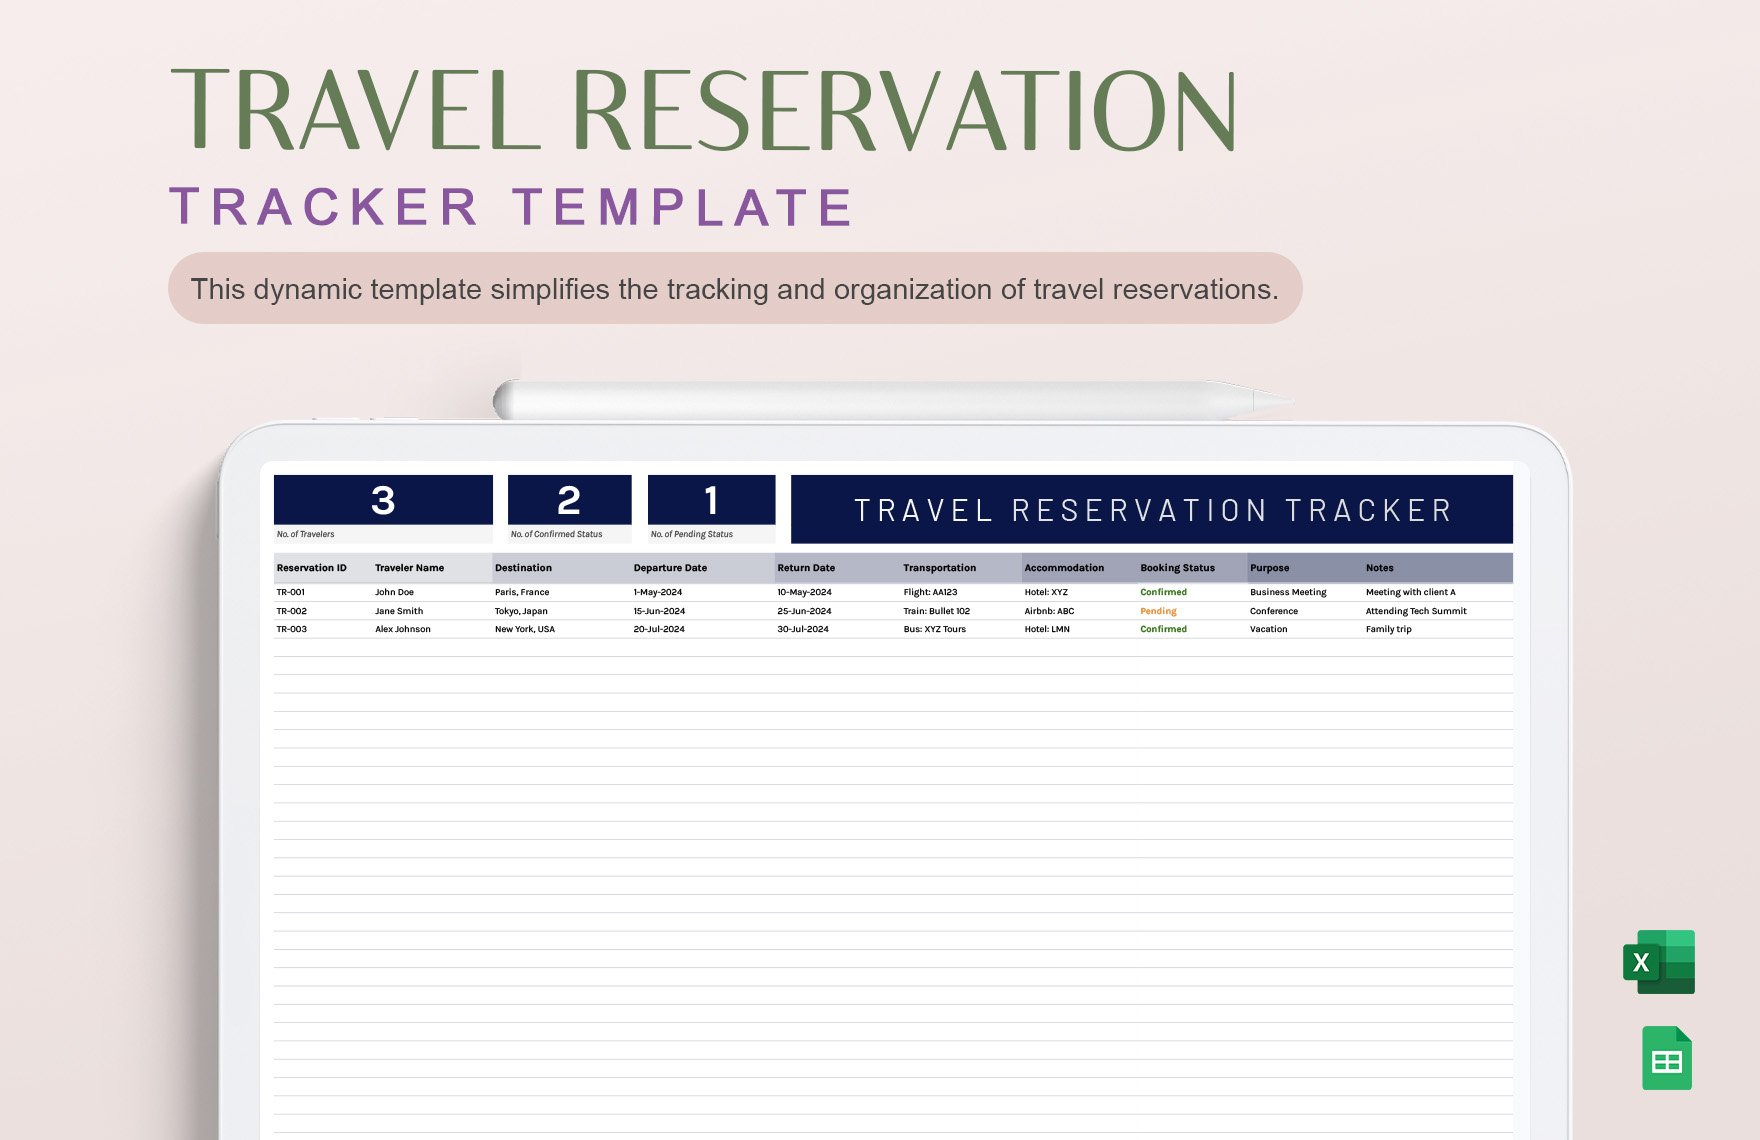 Free Travel Reservation Tracker Template in Excel, Google Sheets